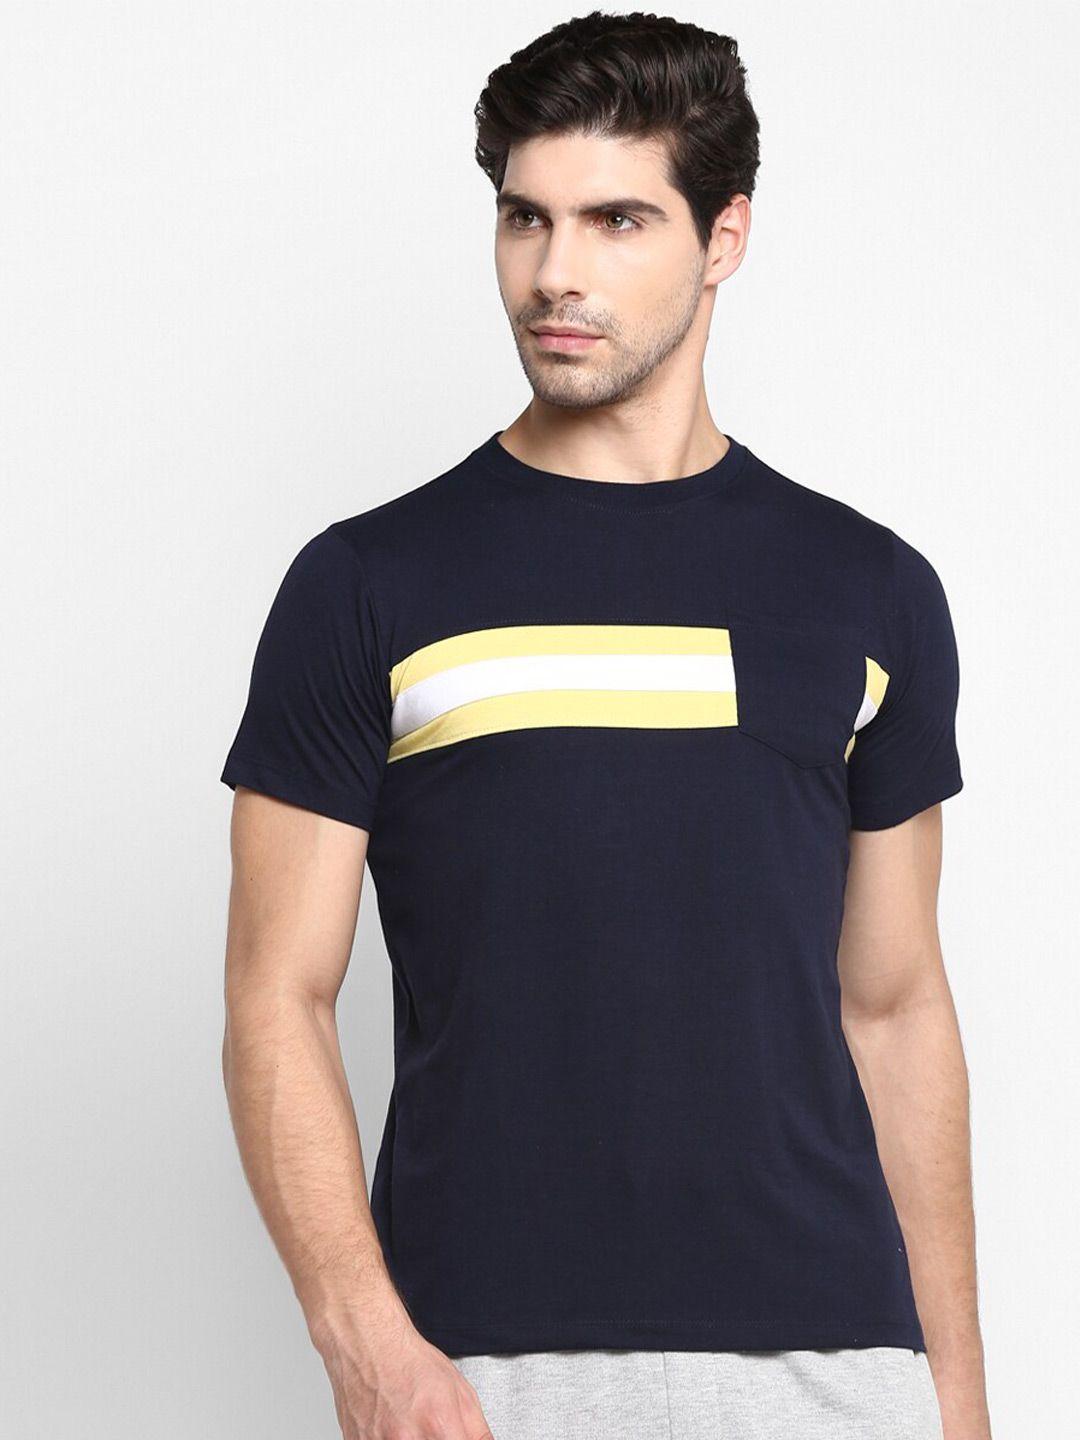 off limits striped rapid-dry & anti microbial cotton sports t-shirt